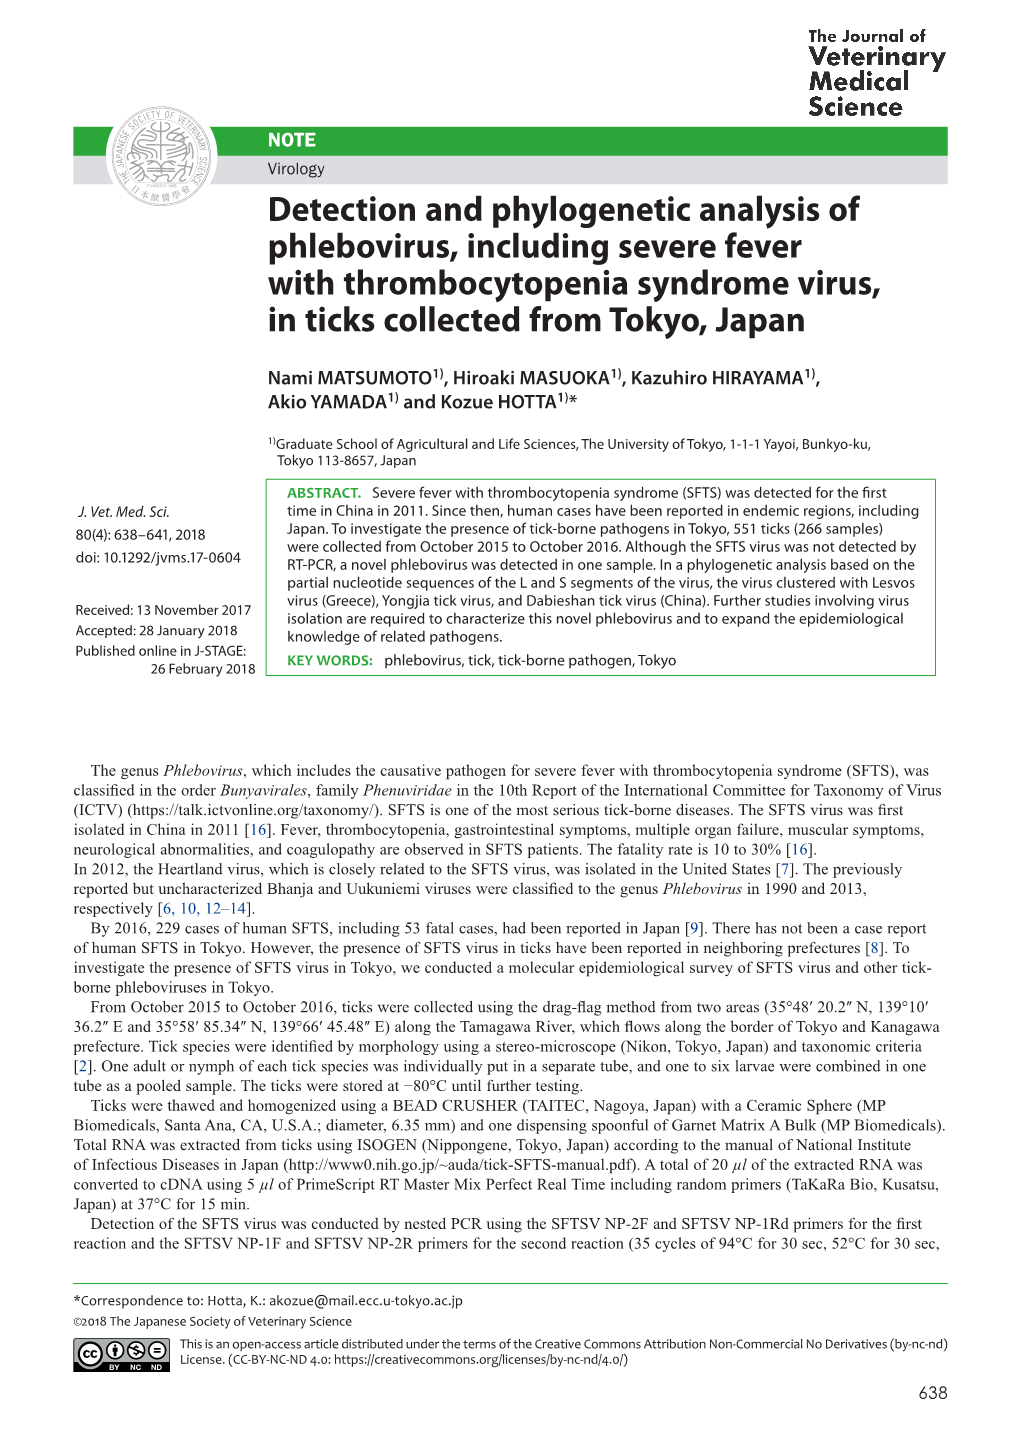 Detection and Phylogenetic Analysis of Phlebovirus, Including Severe Fever with Thrombocytopenia Syndrome Virus, in Ticks Collected from Tokyo, Japan